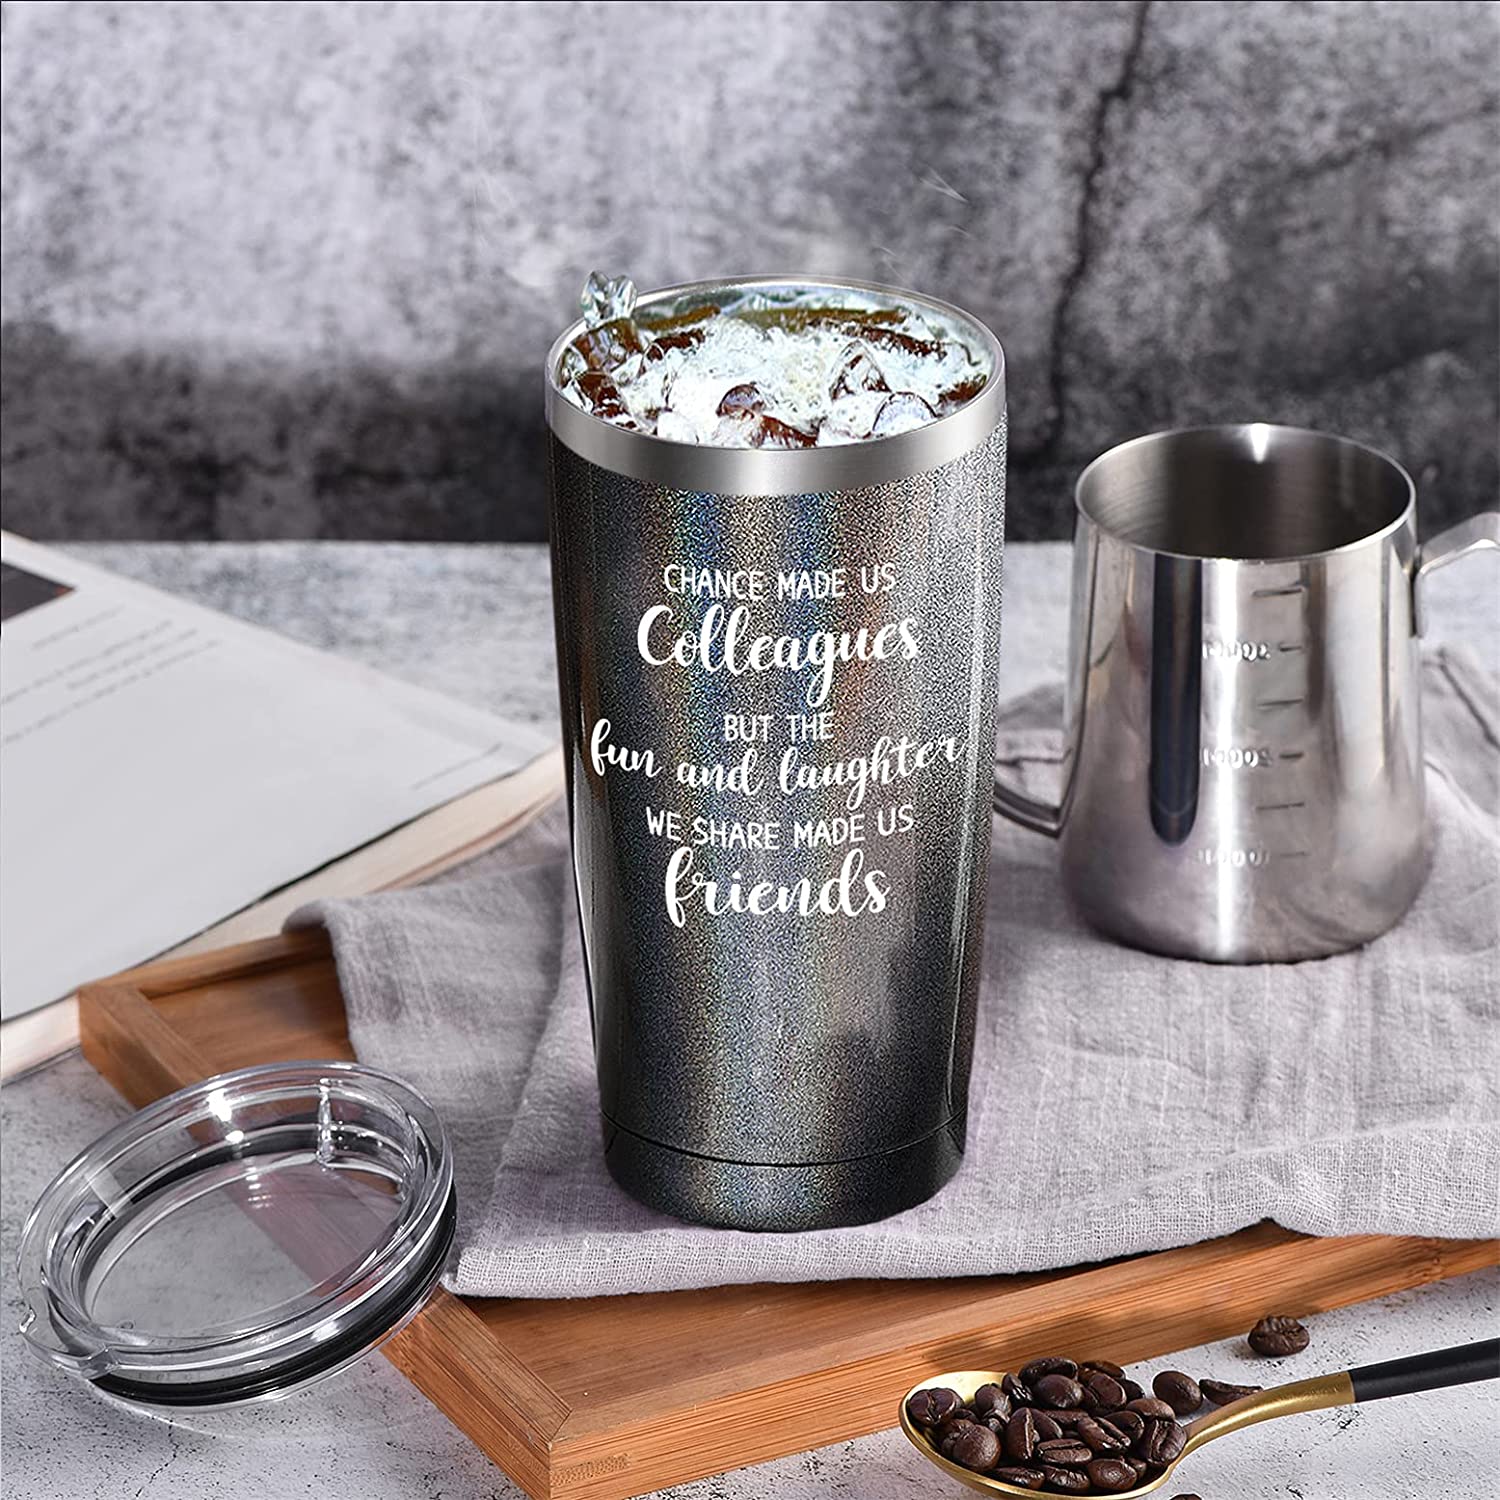 17 Gifts for Coworkers to Show Appreciation